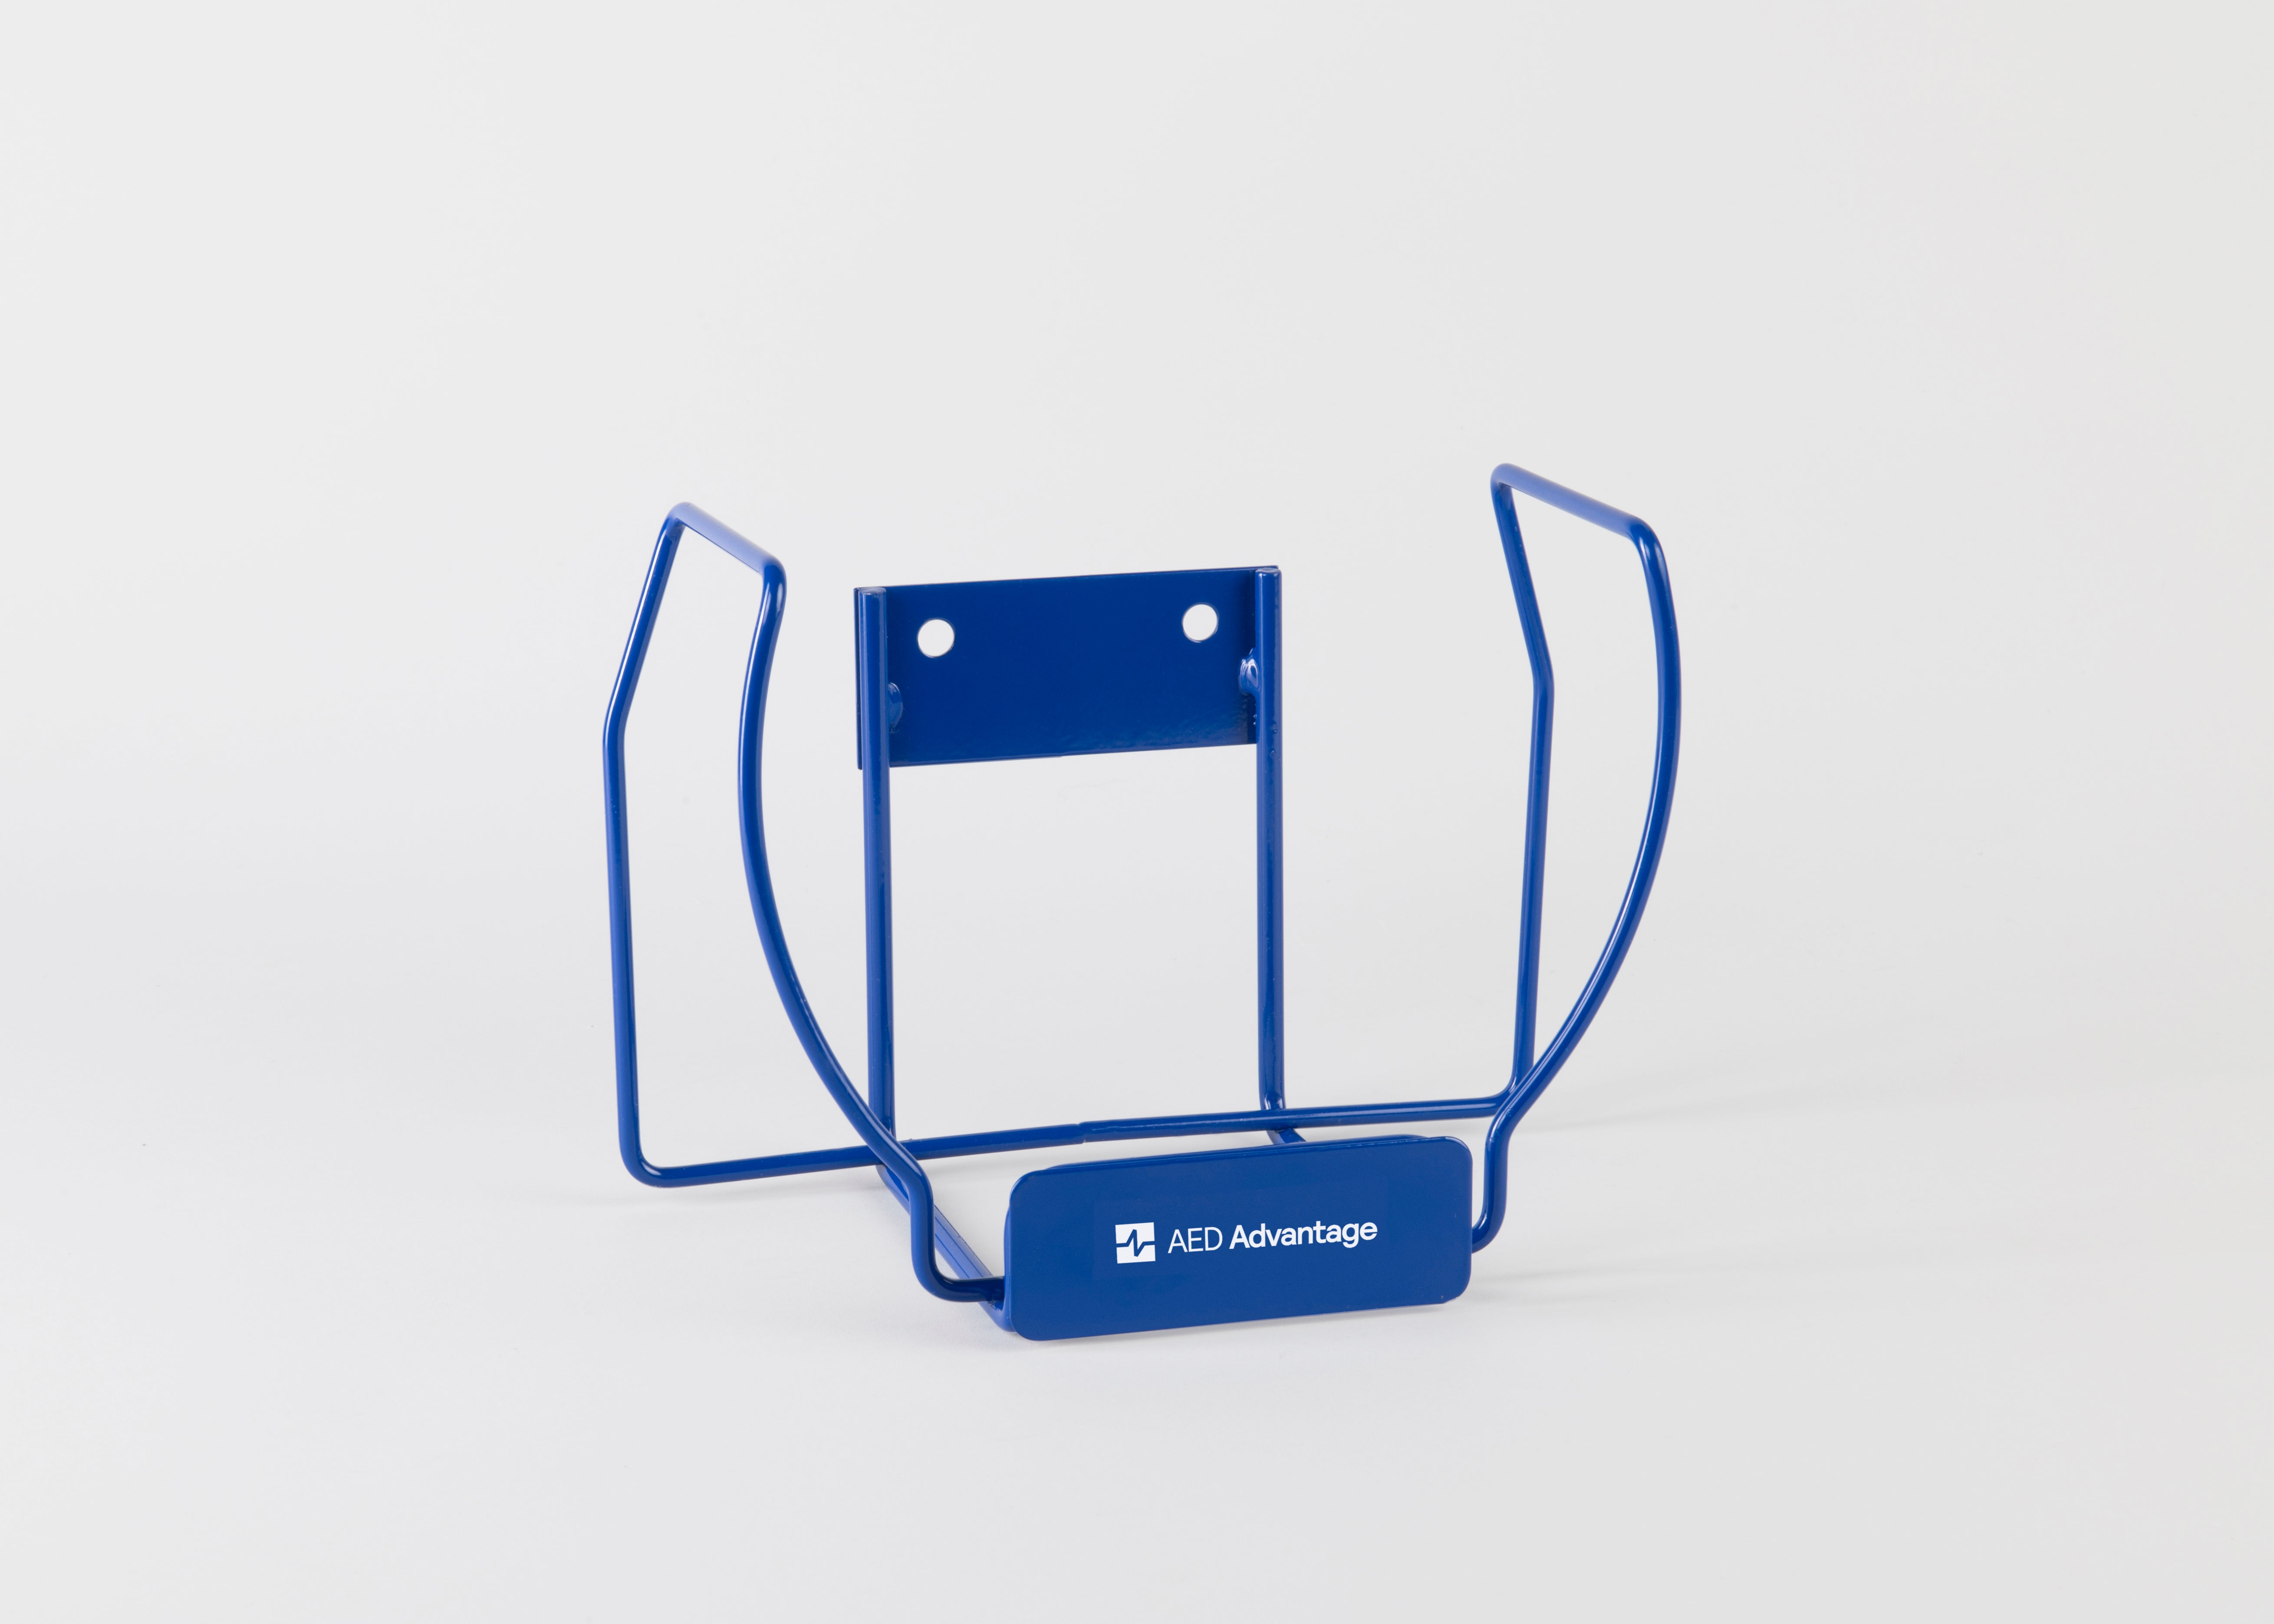 A blue metal wall mount bracket meant to store a HeartSine AED